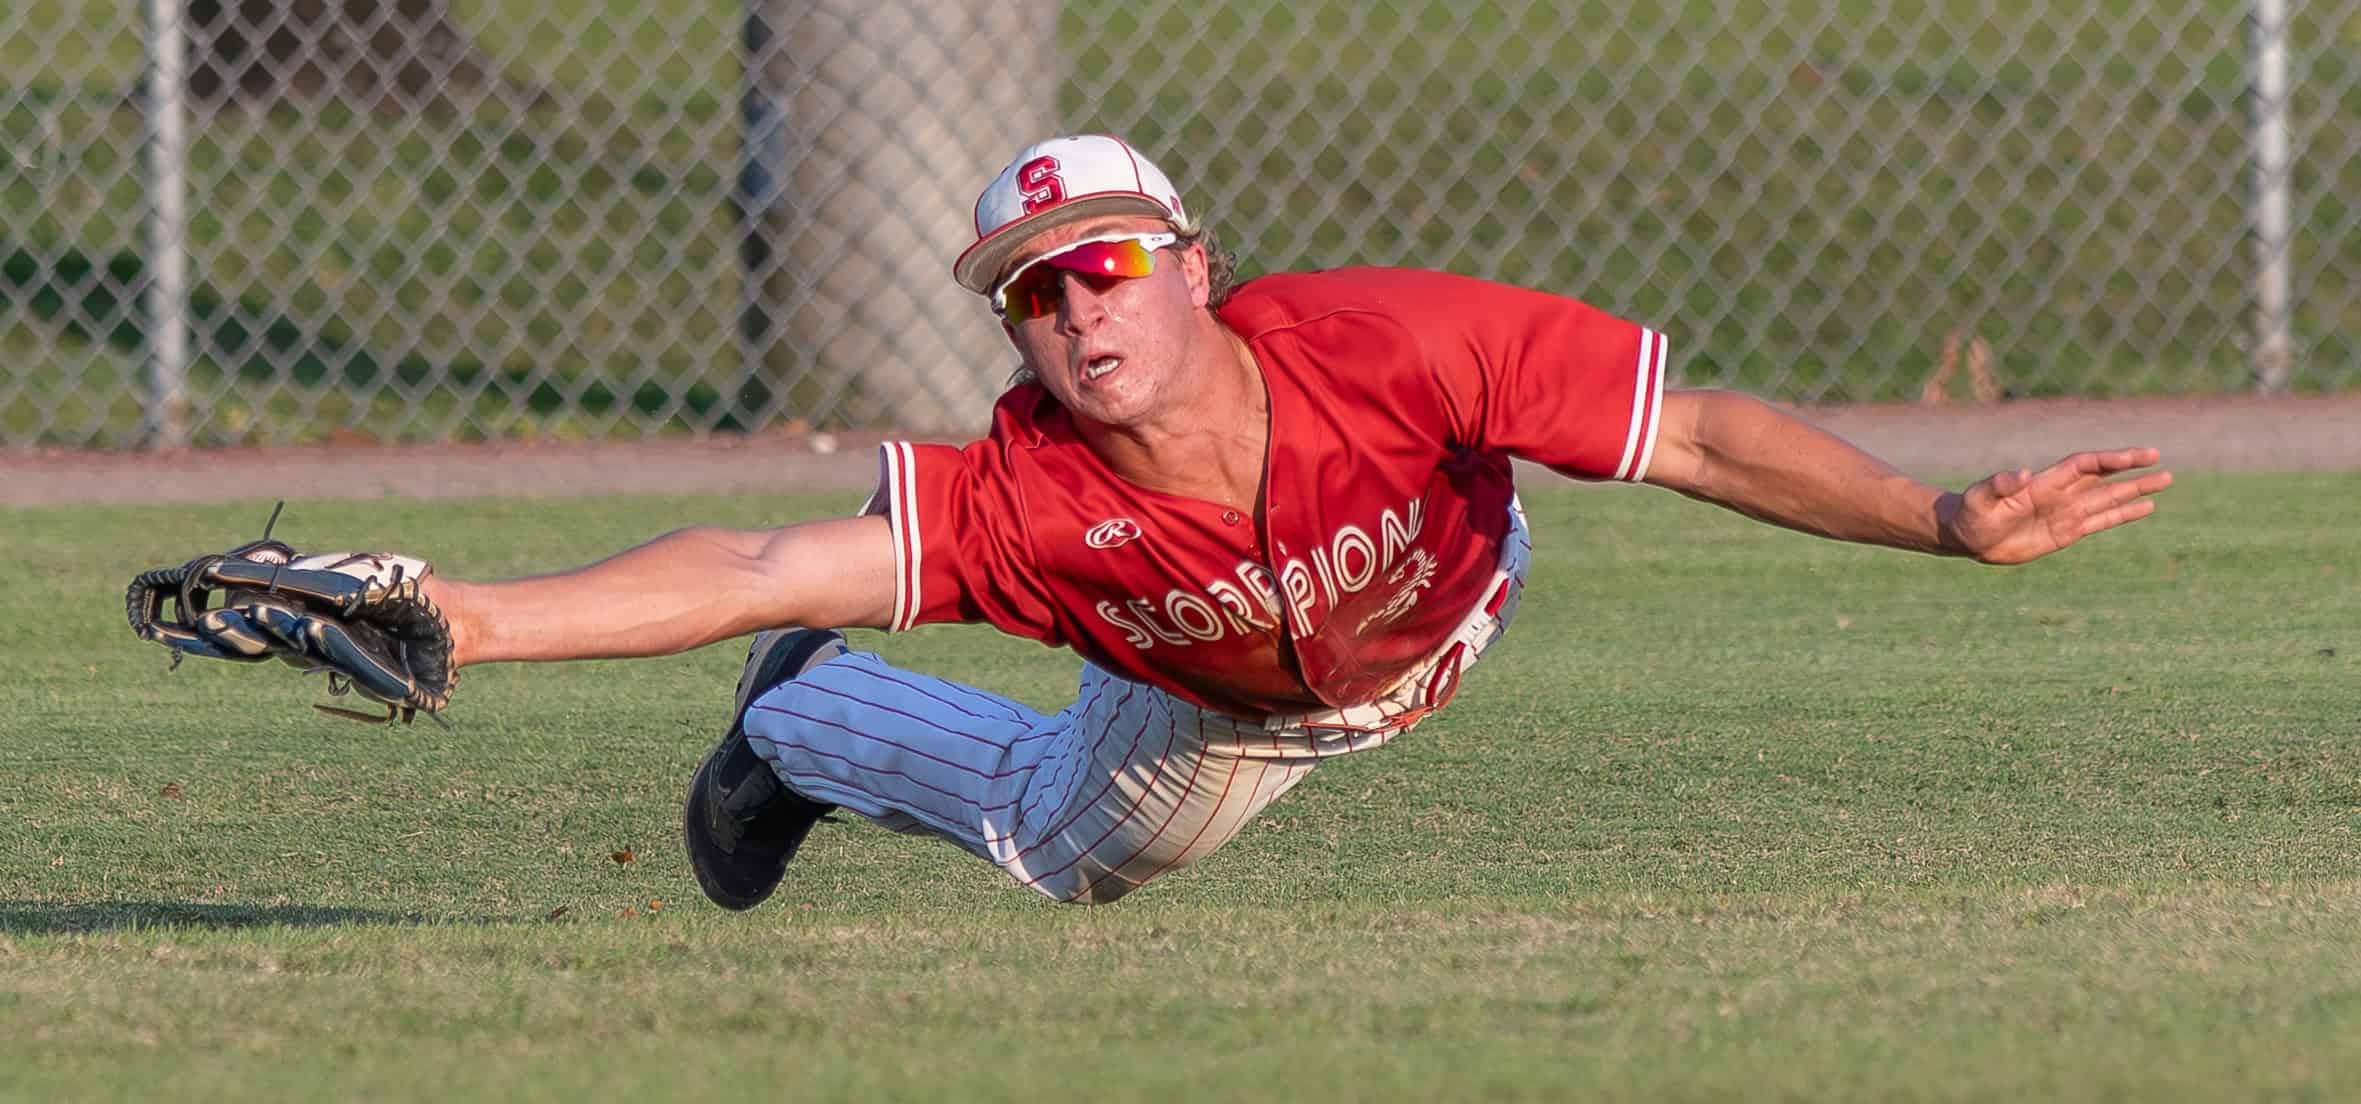 Satellite High’s left fielder made a diving catch on a fly ball off the bat of Nature Coast’s Dylan Palmer in the 4A Regional Quarterfinal game. Photo by [Joseph Dicristofalo]